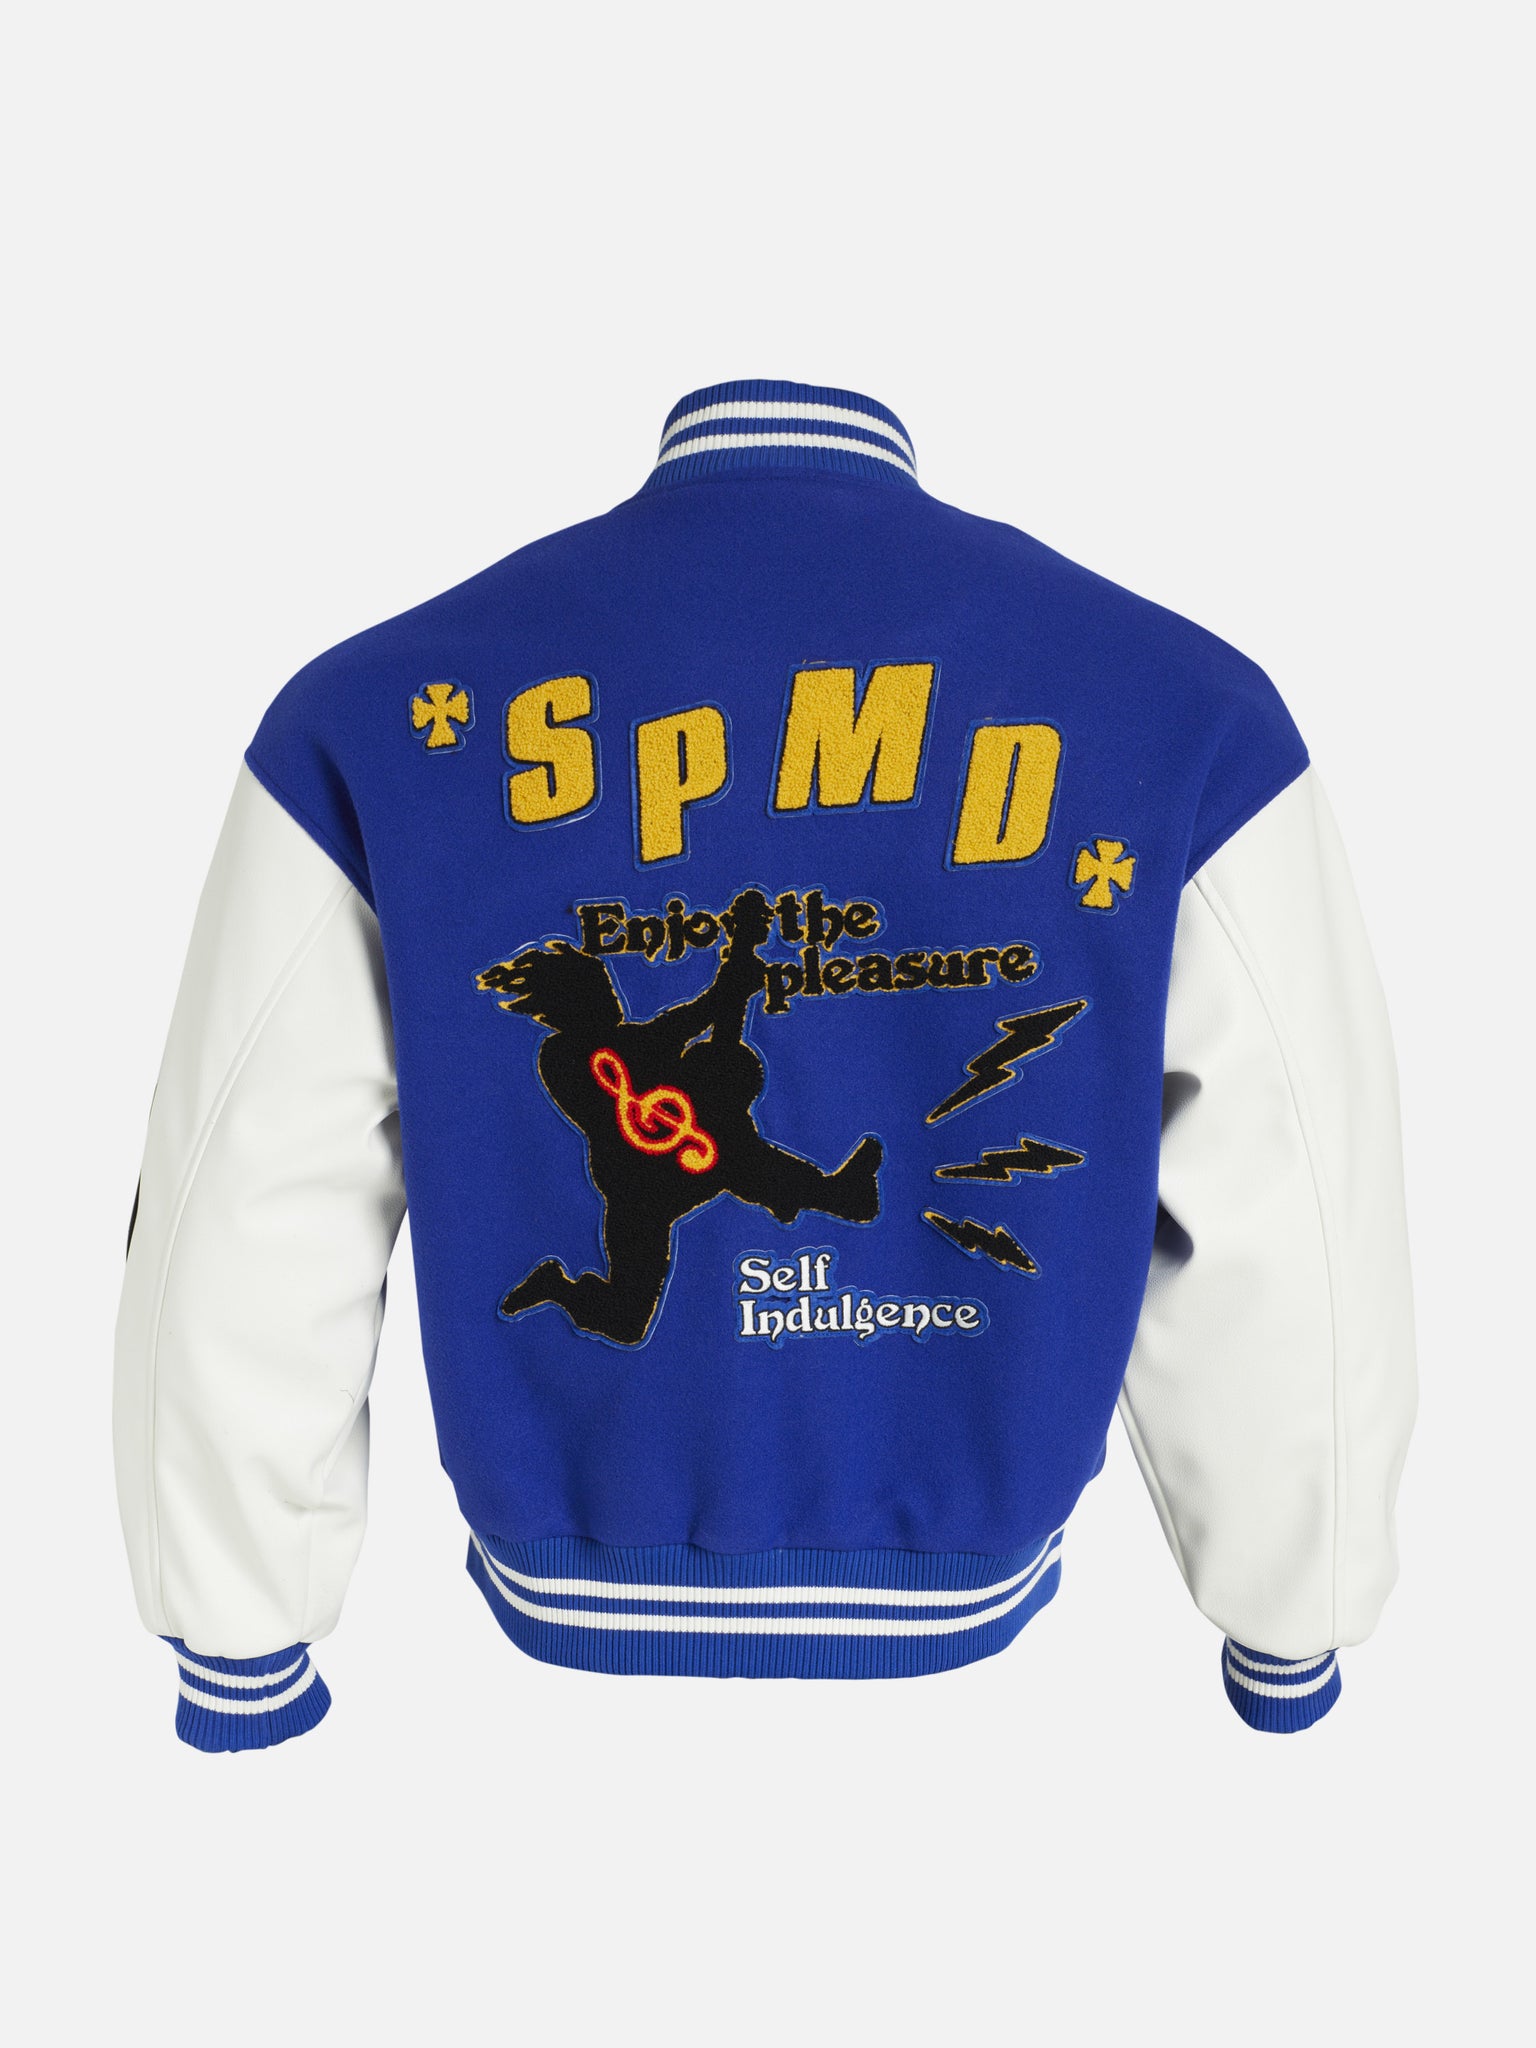 The Supermade Embroidered Baseball Jacket -1319